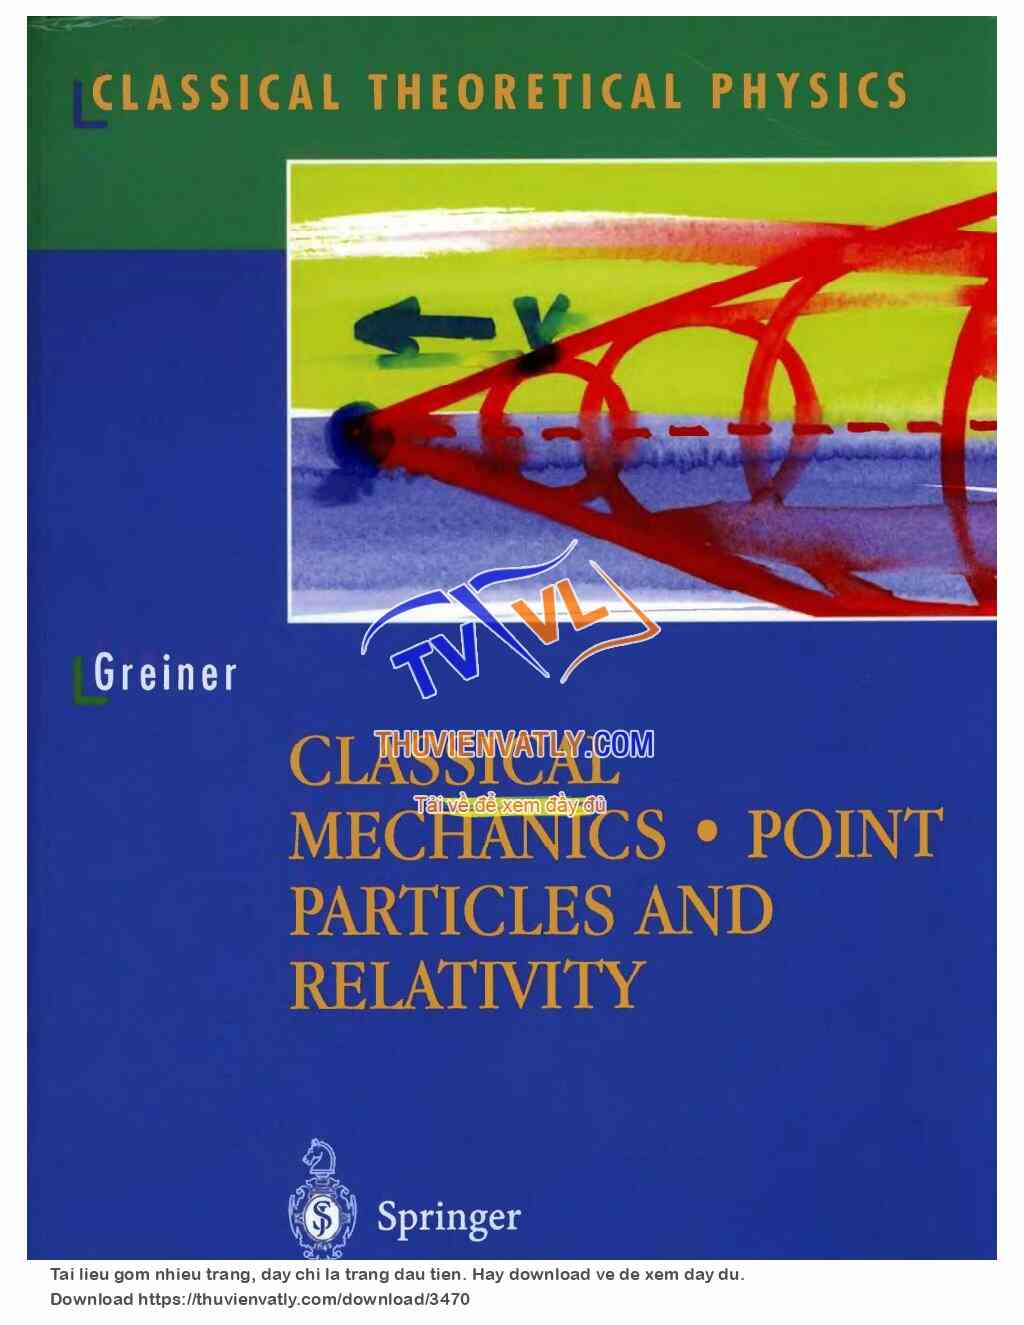 Greiner - Classical Mechanics, Point Particles and Relativity